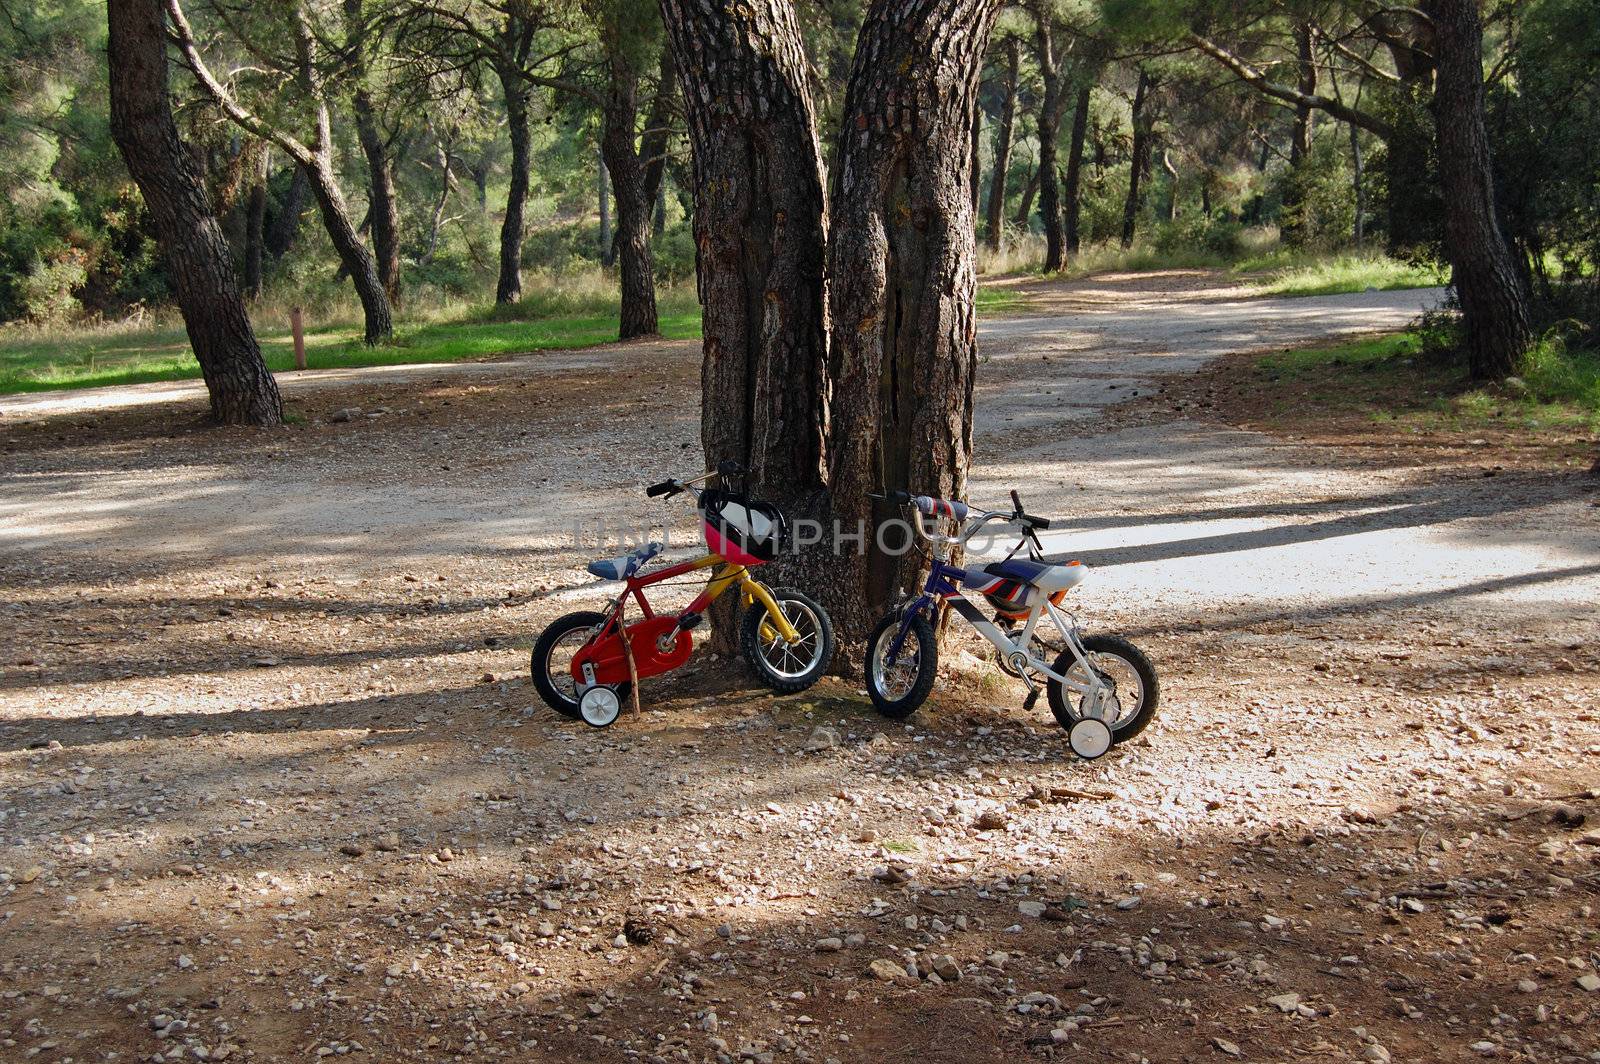 Two children's bikes with training wheels parked below a tree in a park.